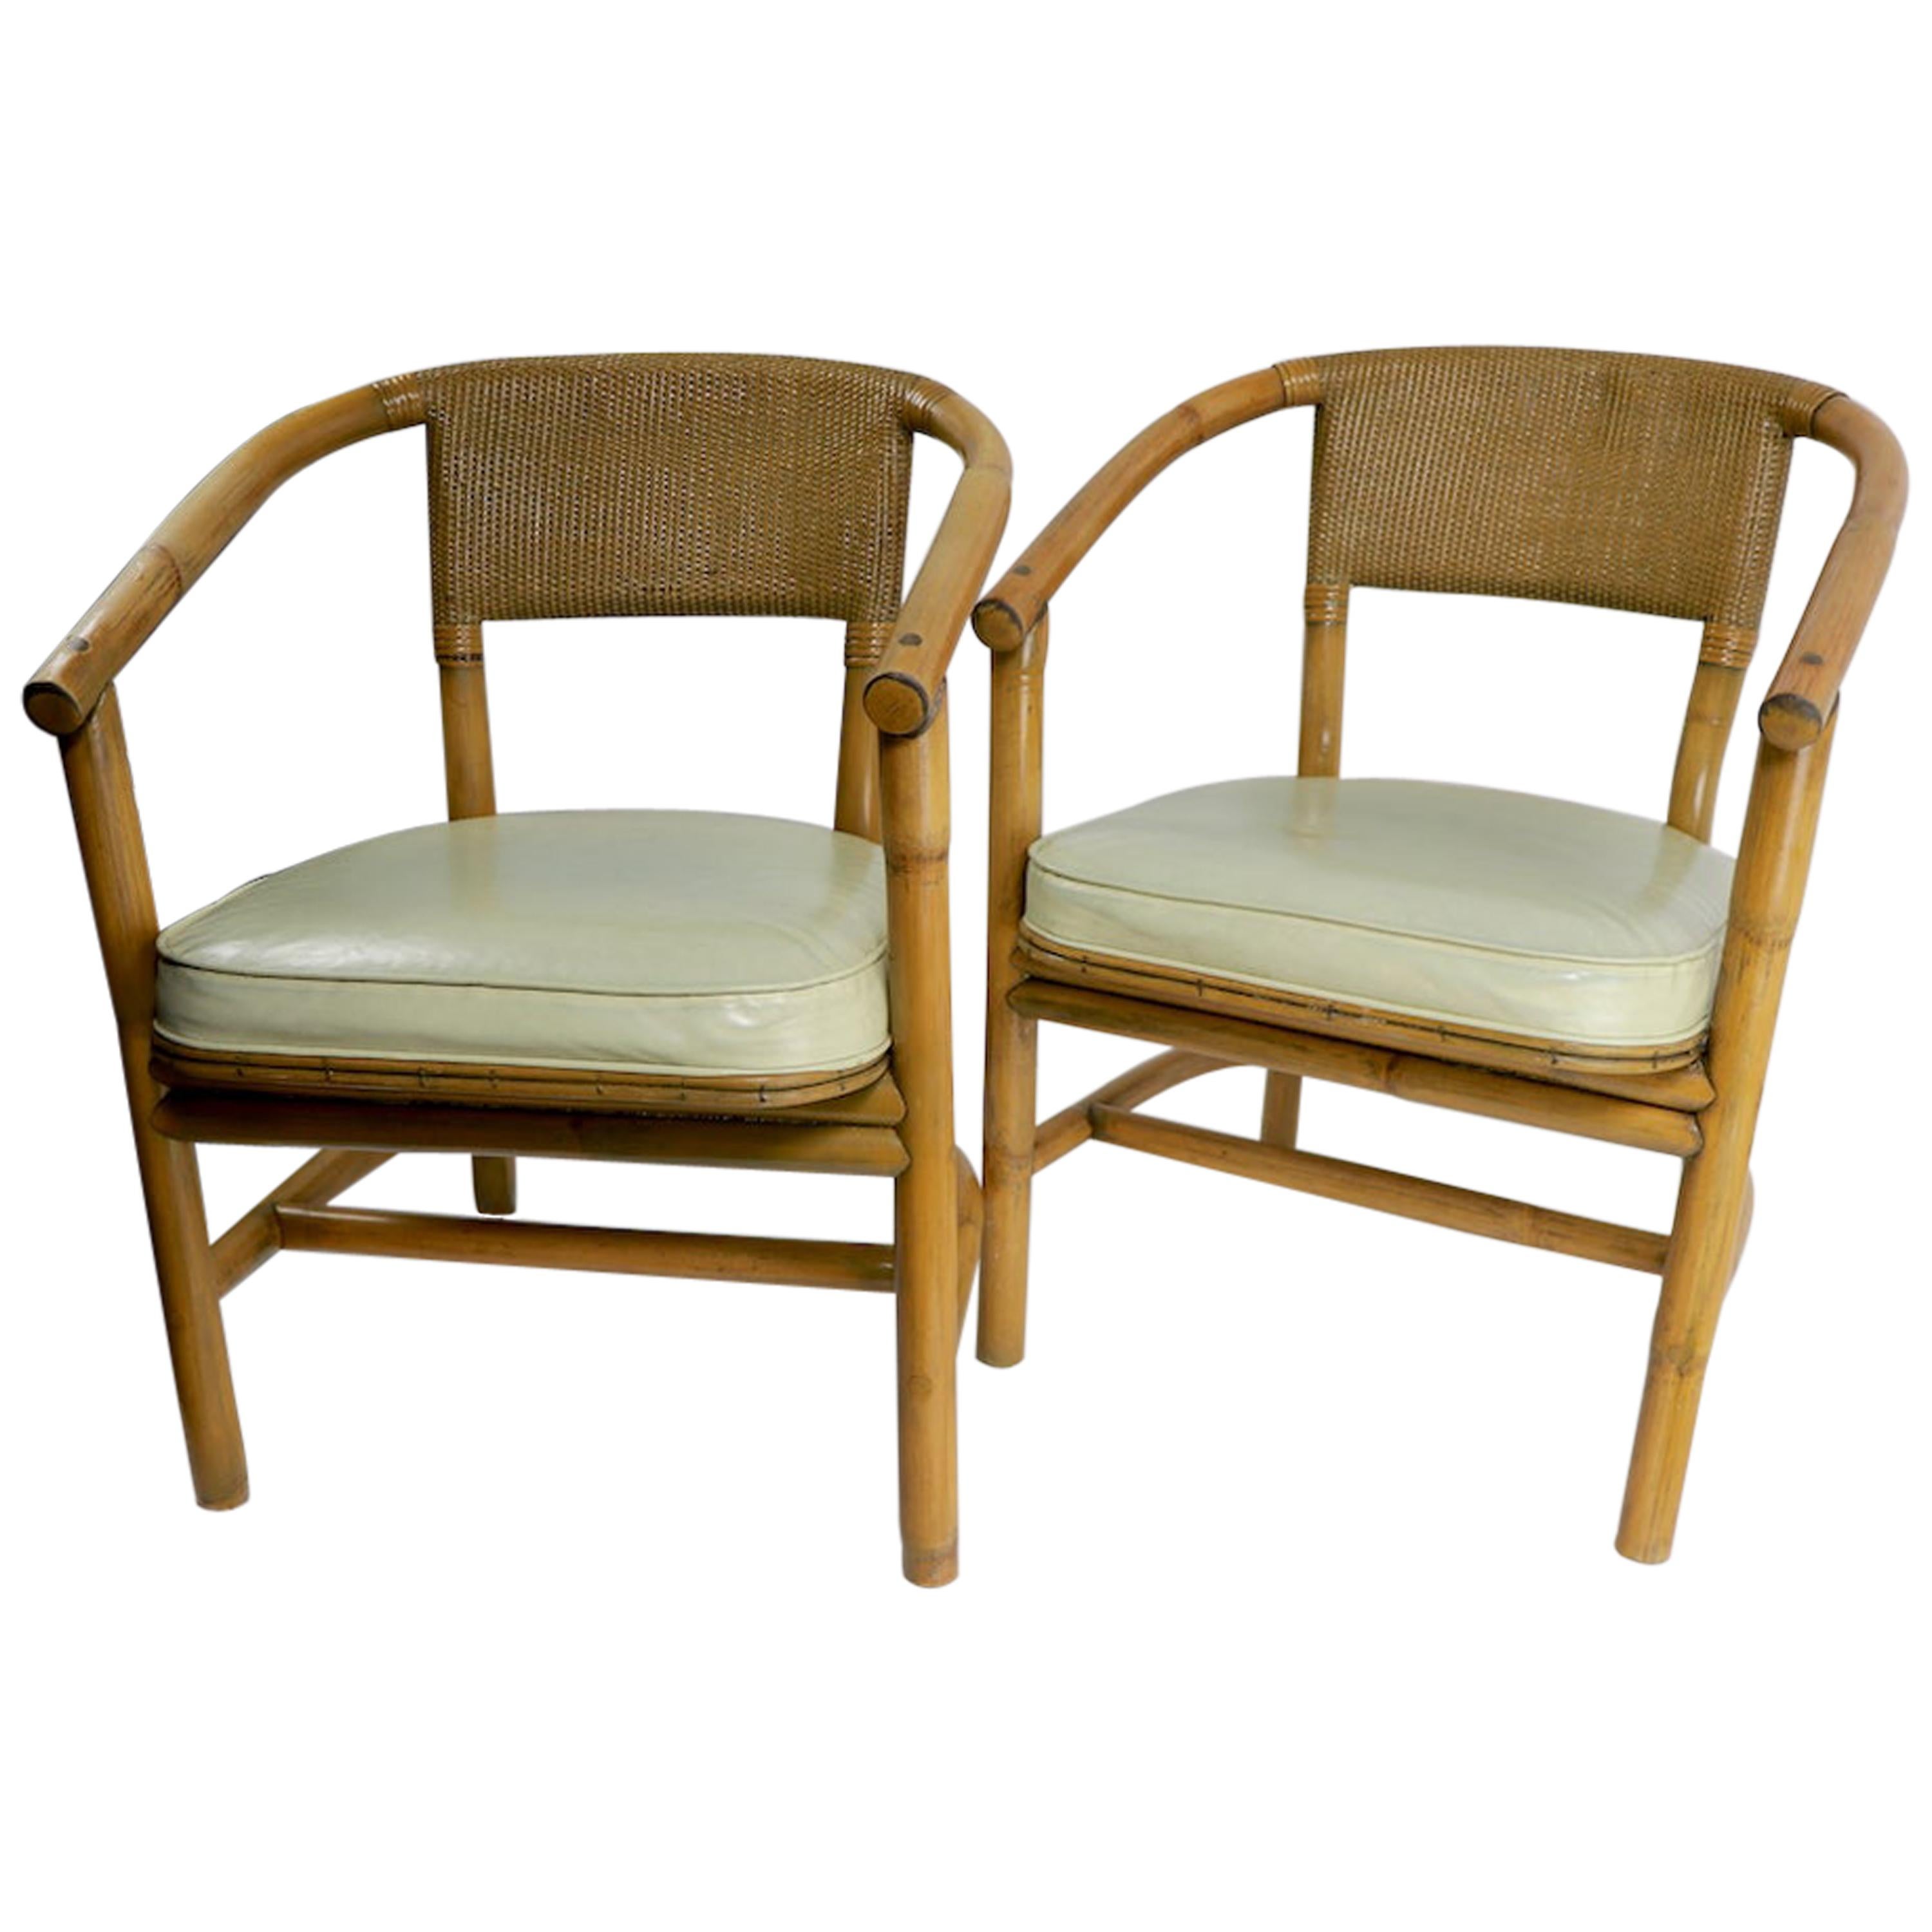 2 Matching Bamboo Arm Chairs Attributed to McGuire